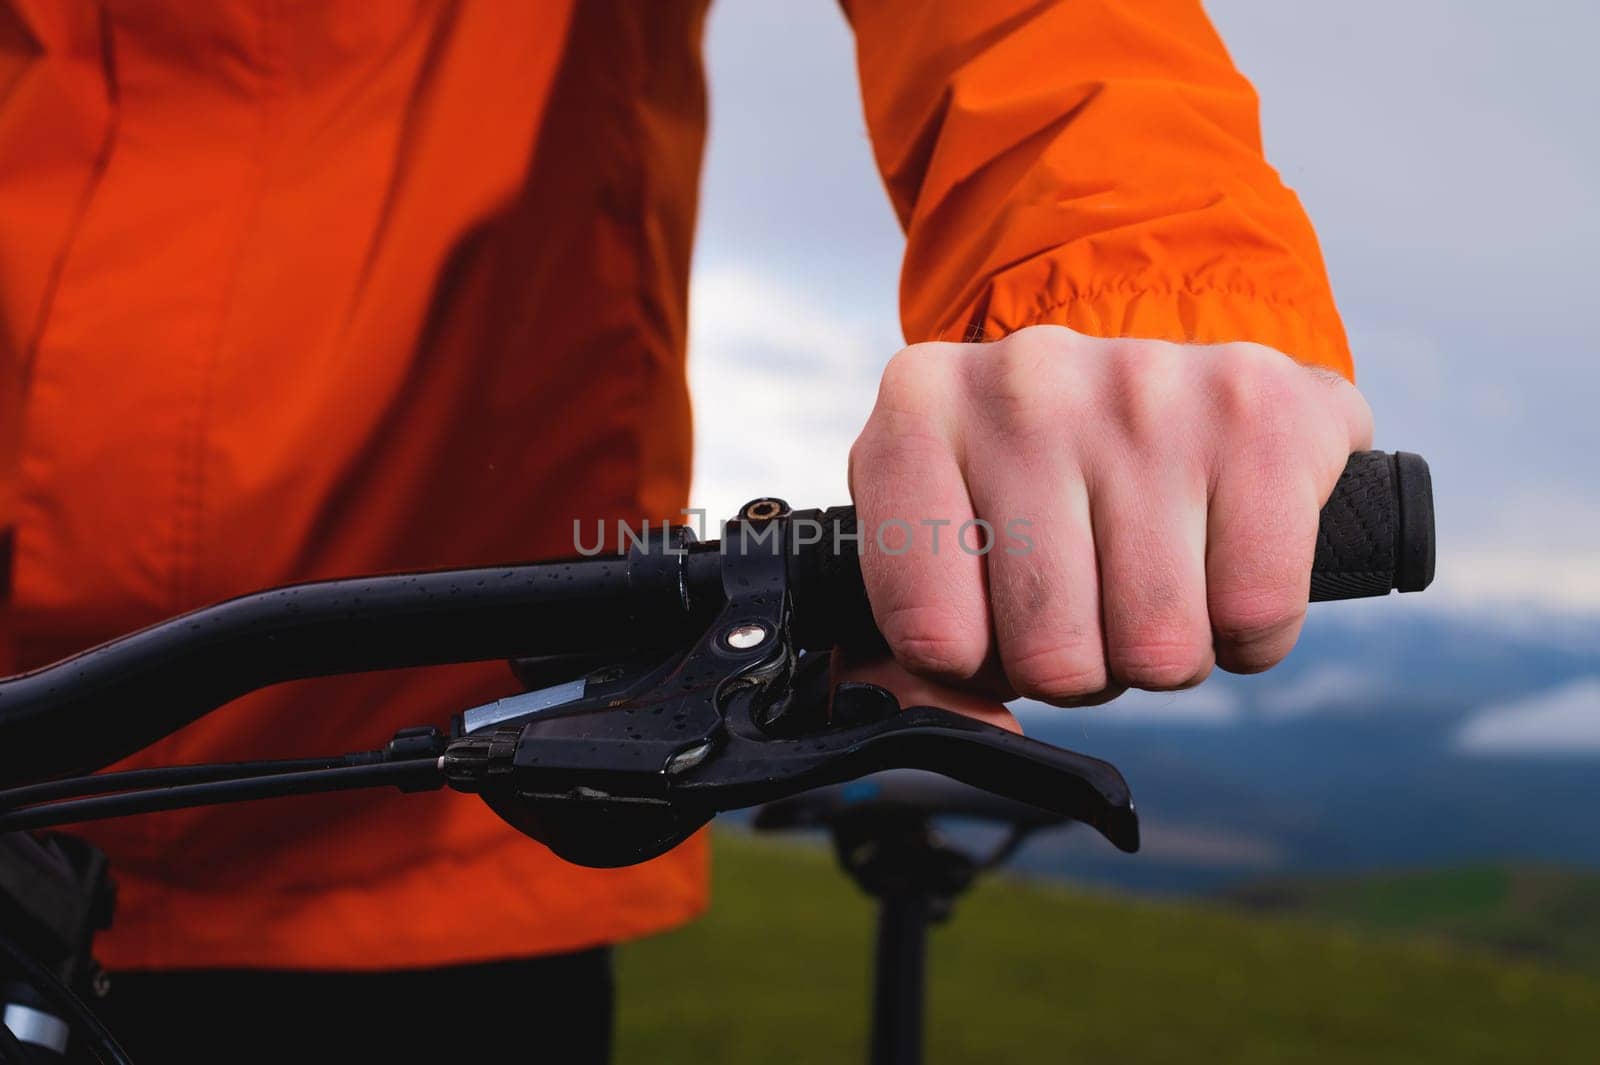 A male cyclist holds a handlebar of a mountain bike in a mountain protected park, close-up image, face is not visible, unrecognizable person.